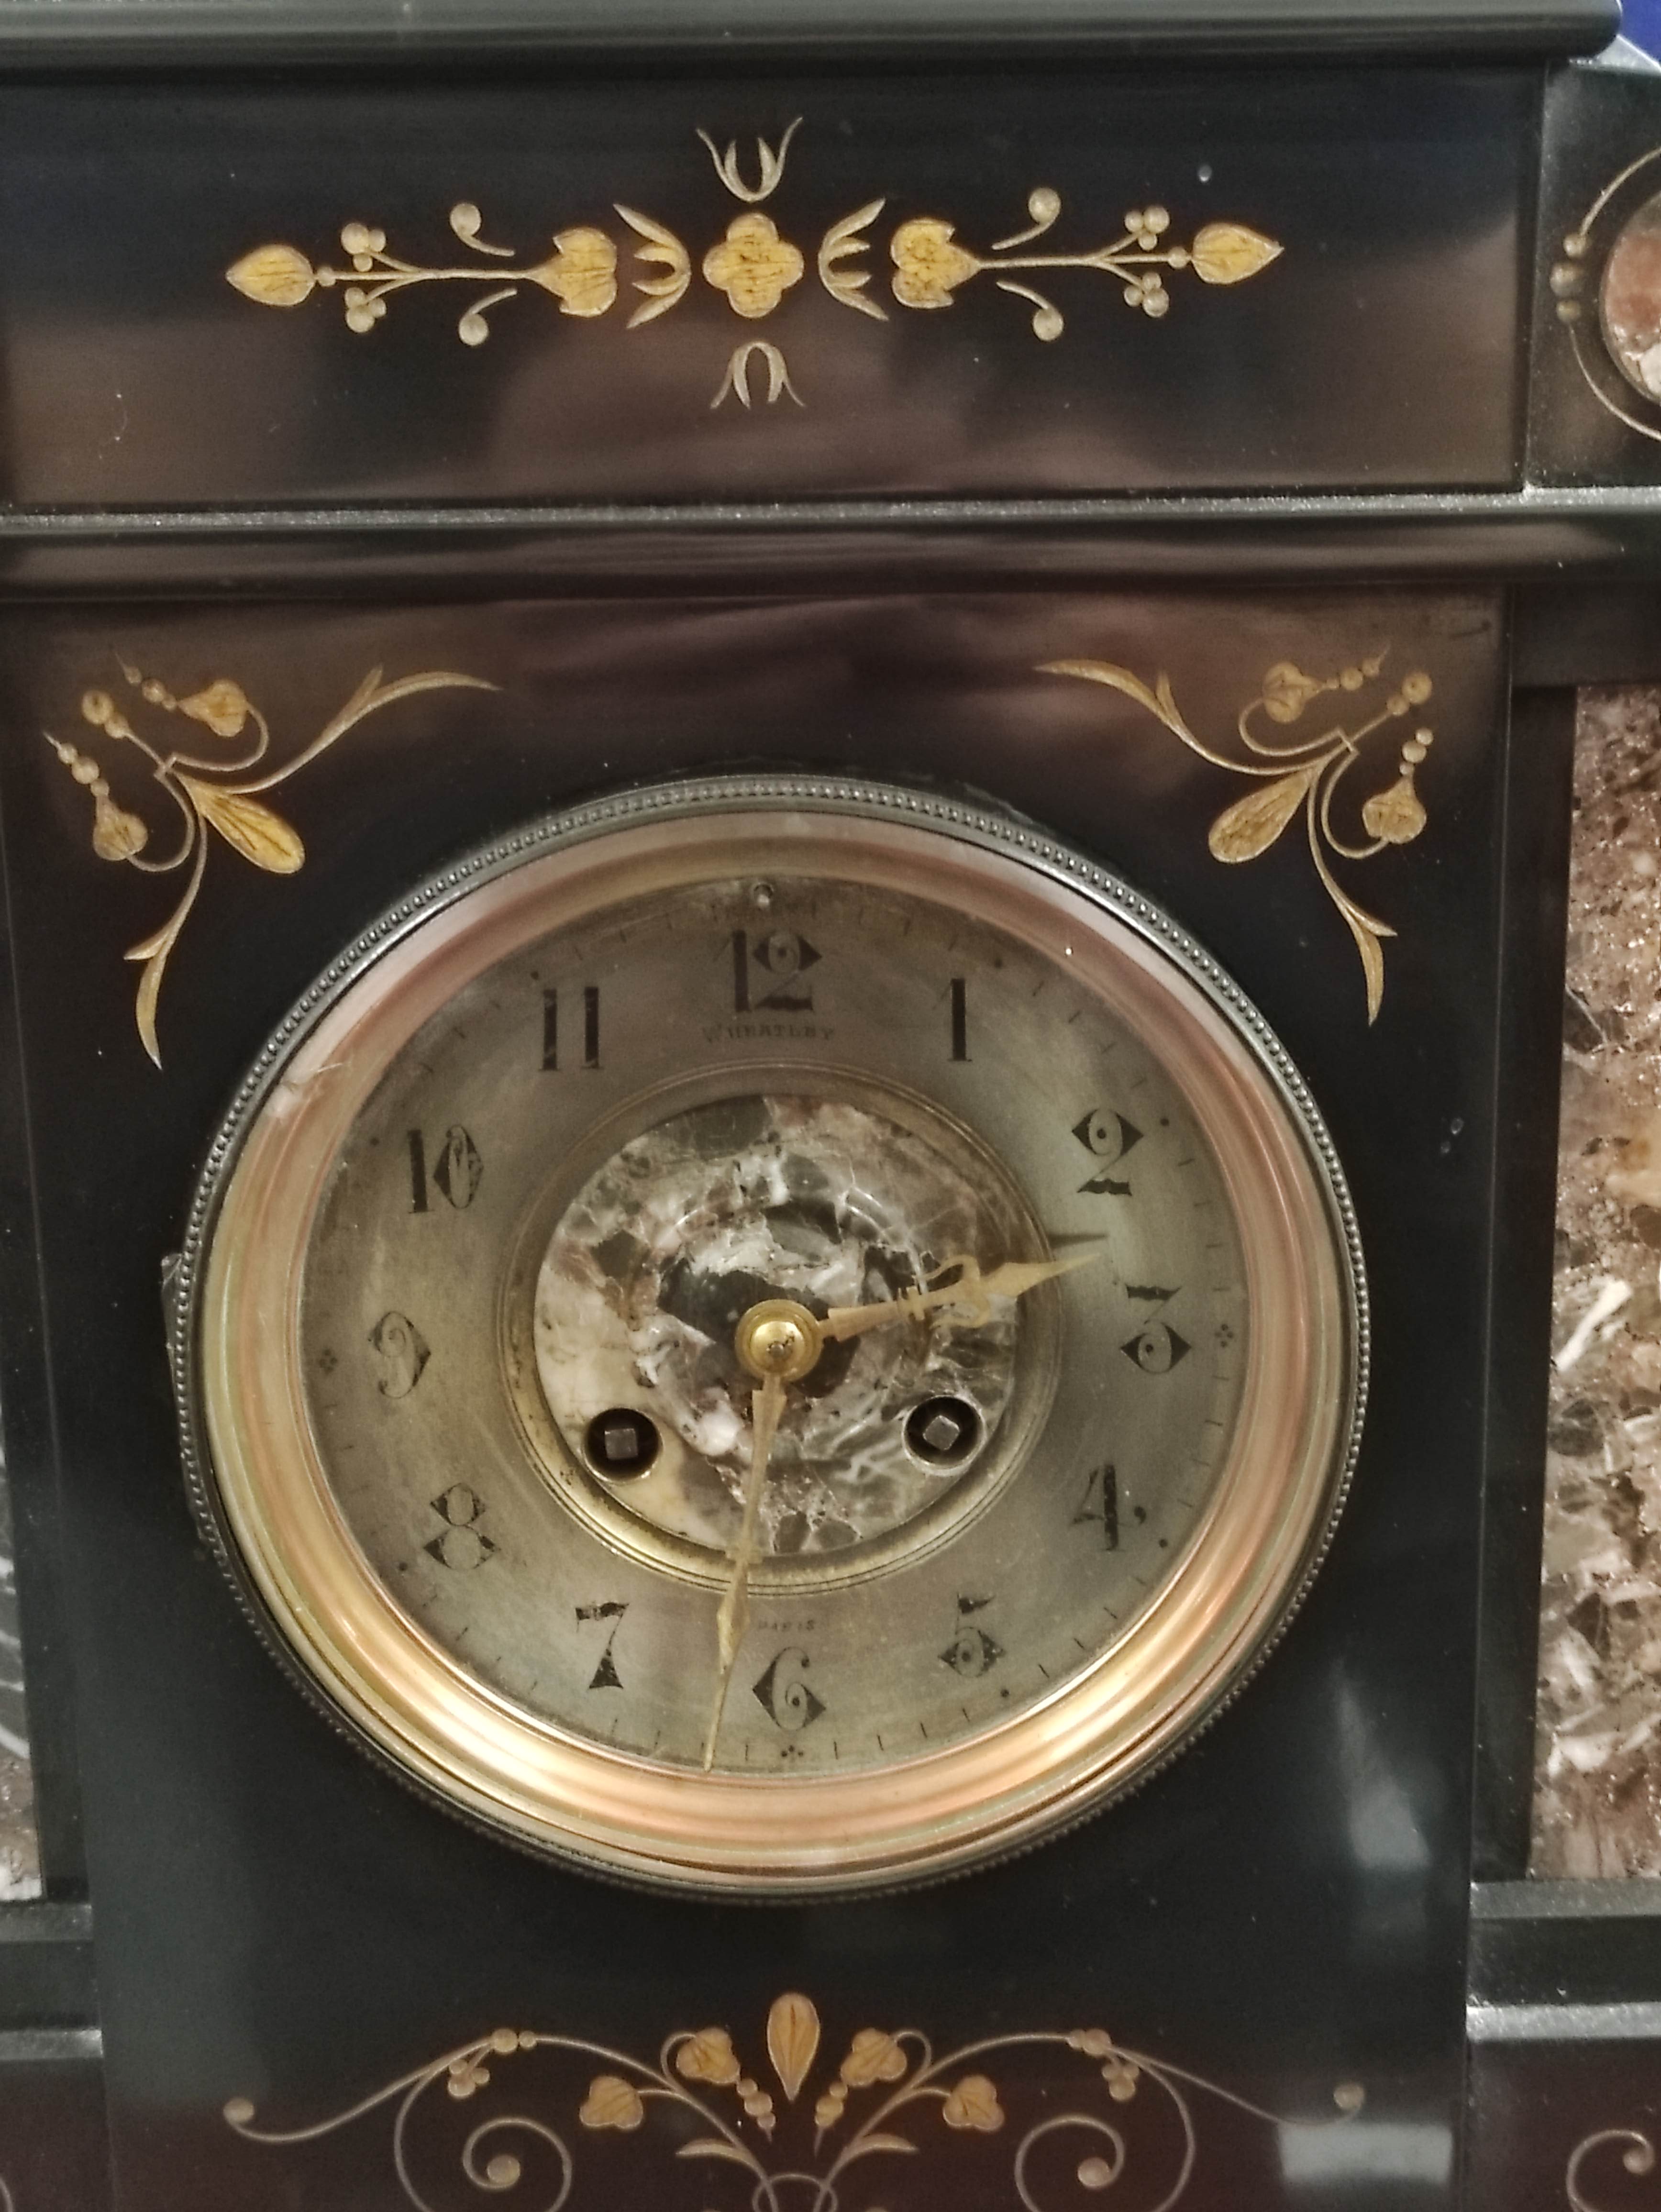 French 19th century mantel clock with inlaid panels and inscribed plaque dated 1892, 44.5cm. - Image 2 of 8